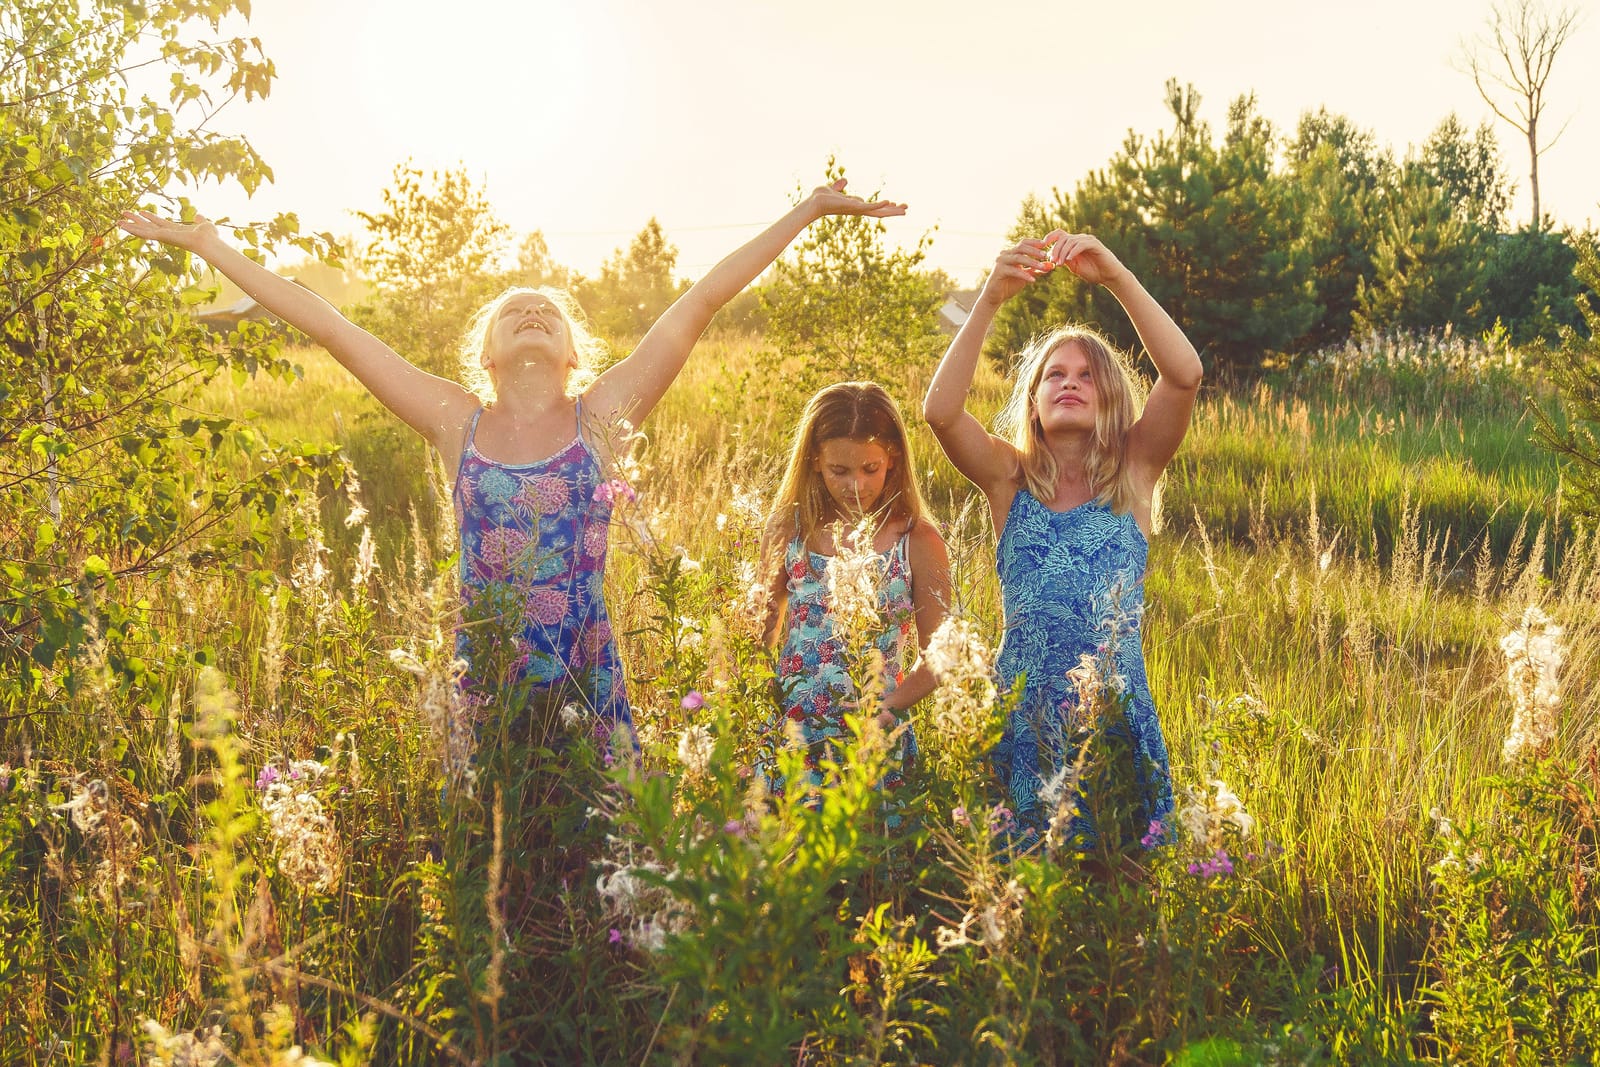 Photograph of three children, standing in a wildflower meadow with their arms raising to the sky